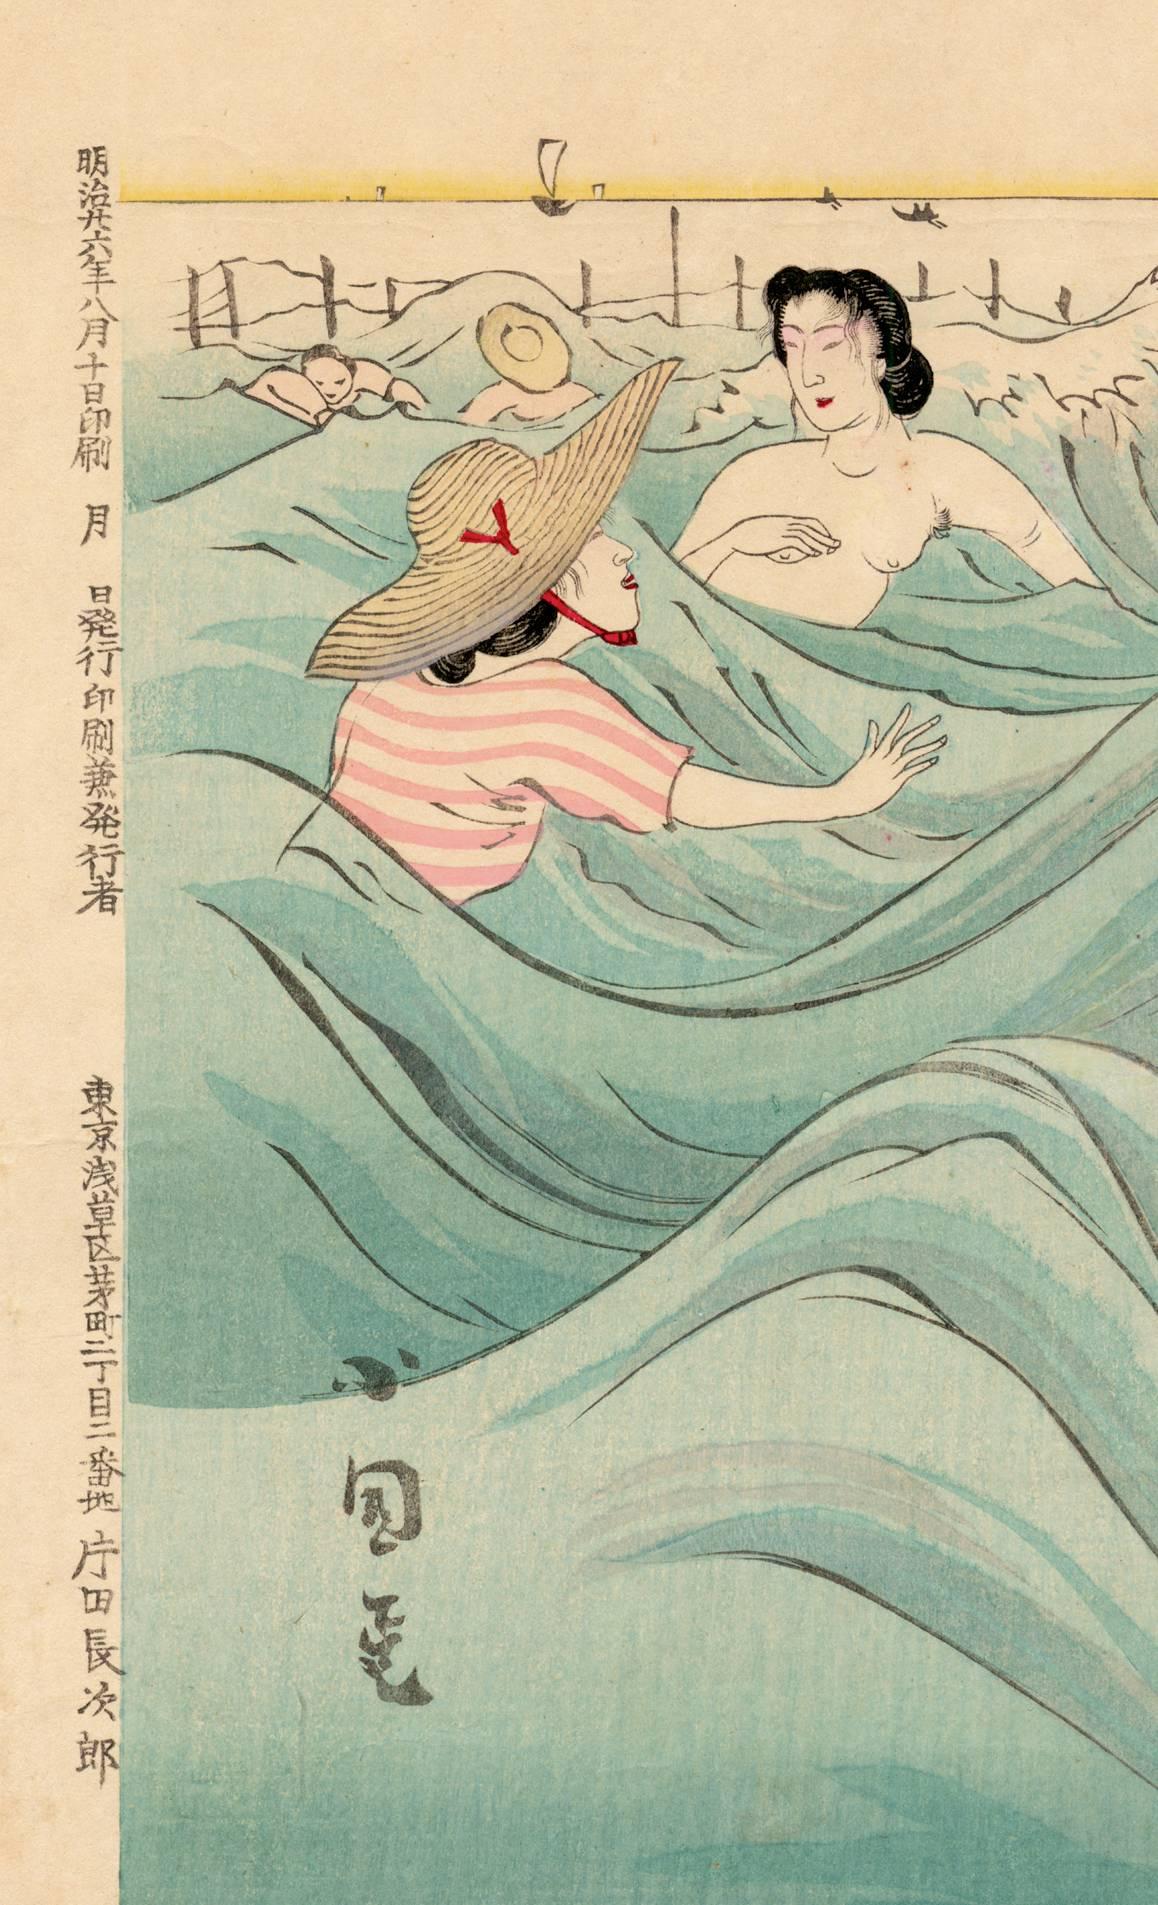 Original Japanese color woodblock print triptych from 1893 depicting the first Japanese beach for sea bathing, which opened in 1885. The lady seated foreground is wearing a knitted woolen bathing suit, most certainly an import from the West. As